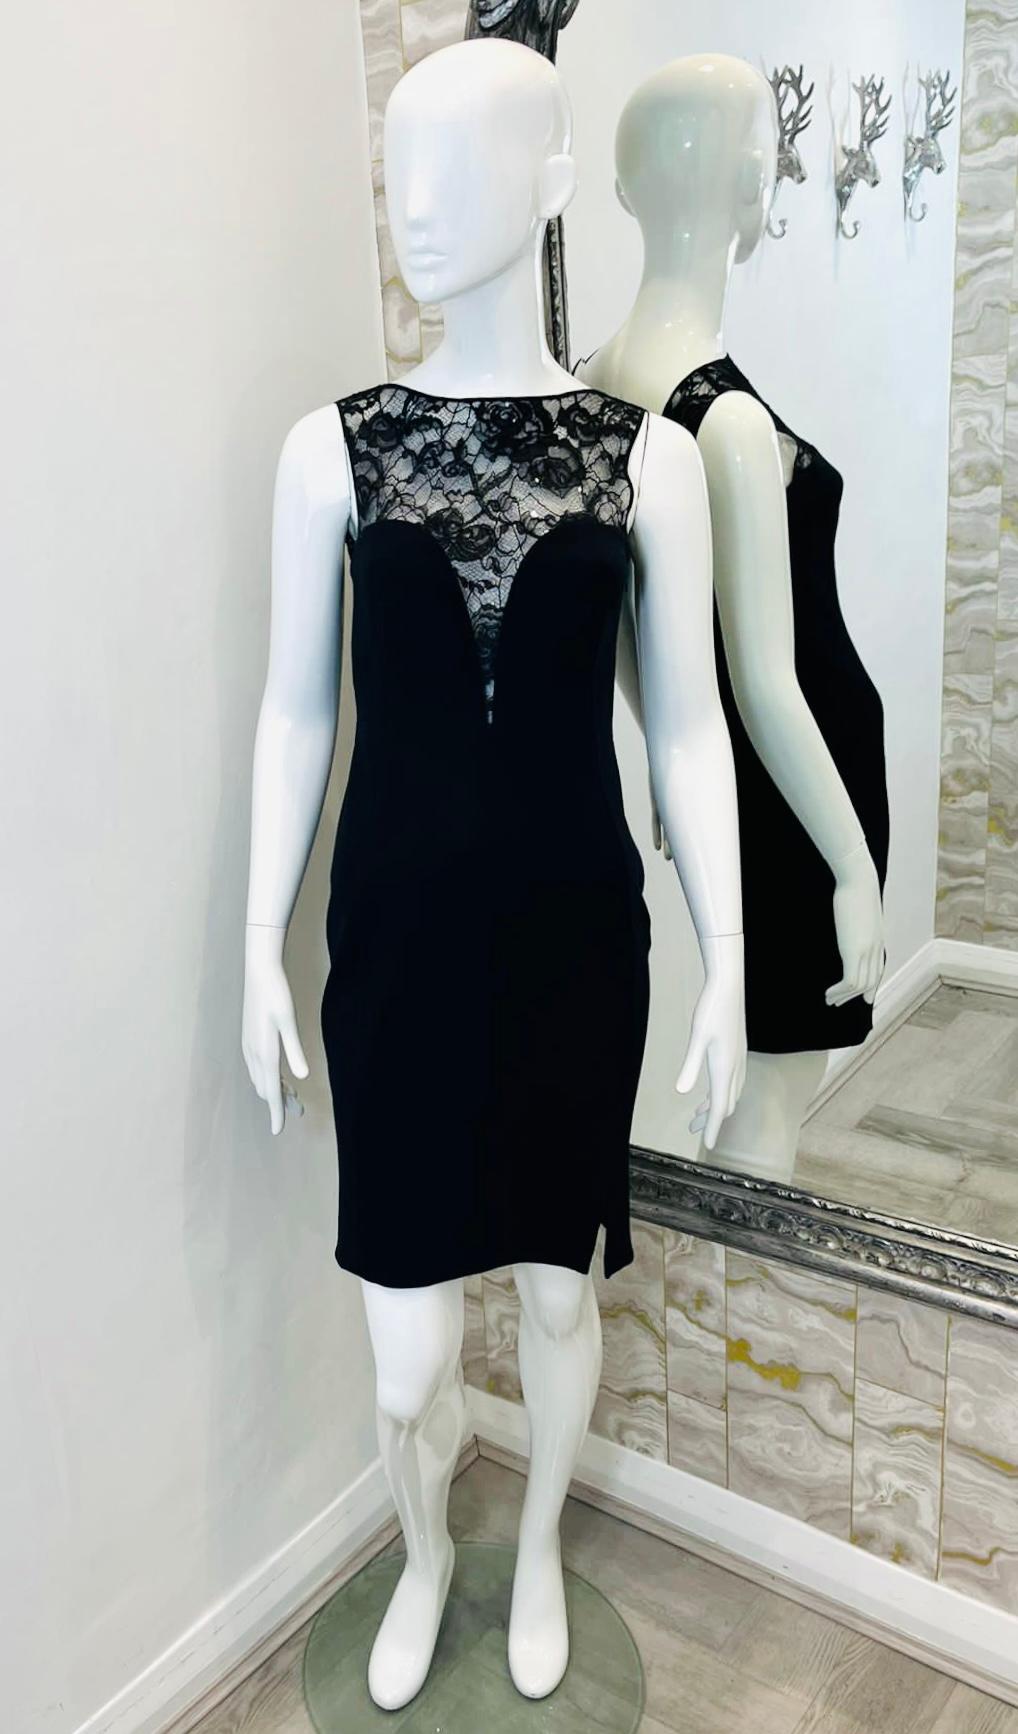 Emilio Pucci Lace Embellished Sheath Dress

Black, mini dress detailed with floral lace, boat neckline top.

Designed with padded bra, slit to the side and open back.

Size – 40IT

Condition – Excellent

Composition – 75% Viscose, 25% Nylon; Lining